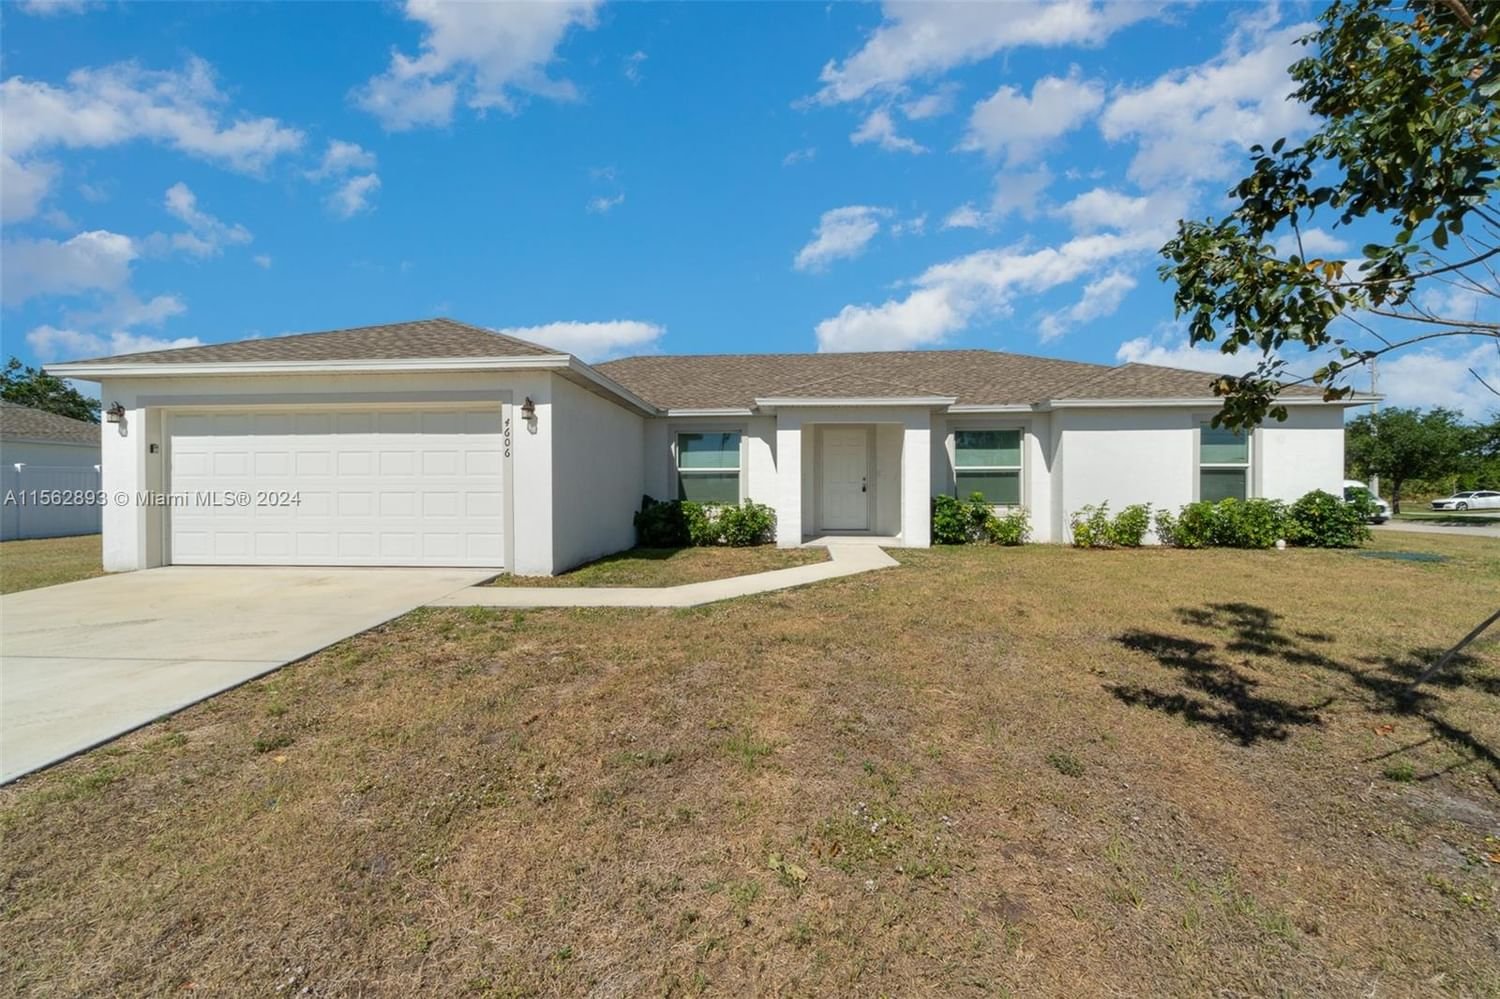 Real estate property located at 4606 Nackman Ter, St Lucie County, PORT ST LUCIE SECTION  34, Port St. Lucie, FL